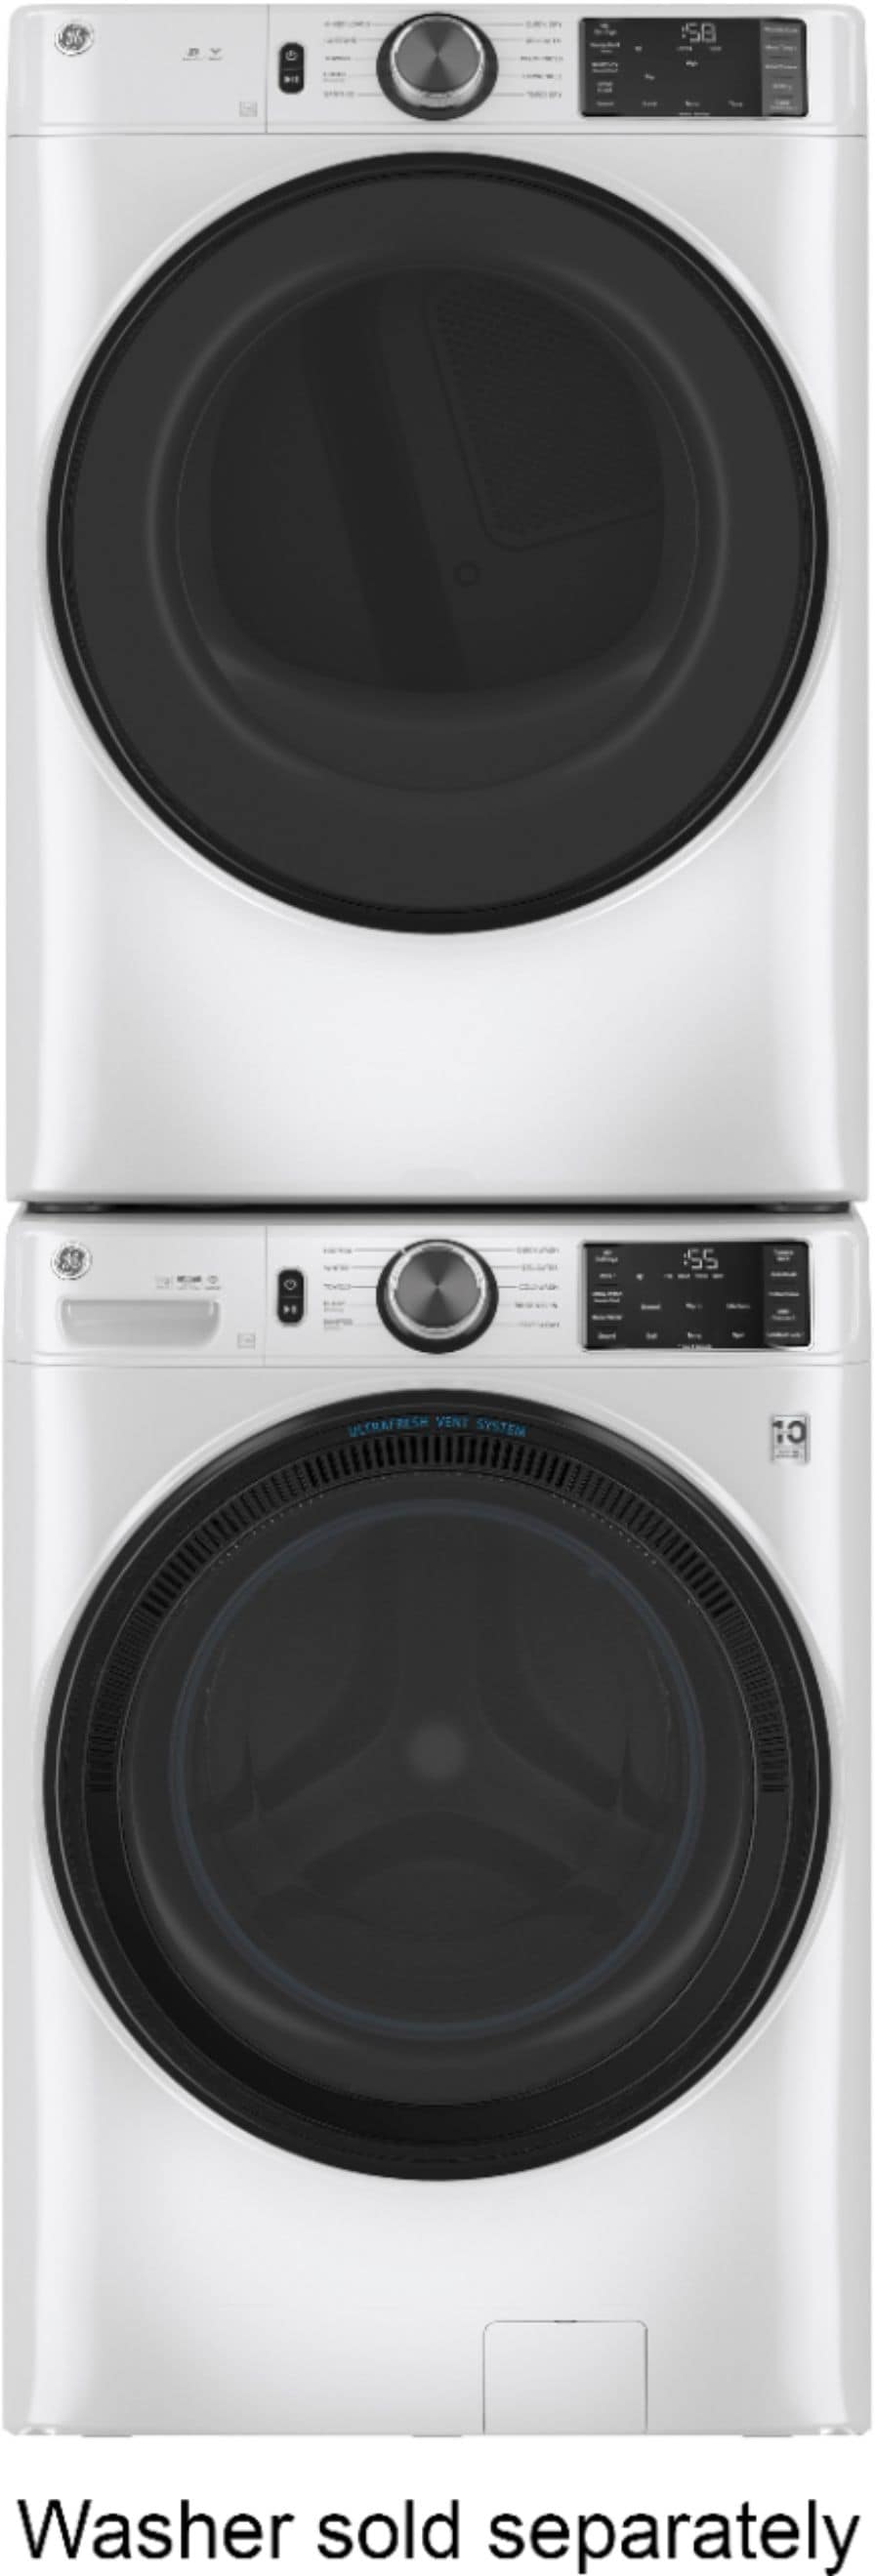 GE - 7.8 Cu. Ft. 10-Cycle Electric Dryer - White on white_10